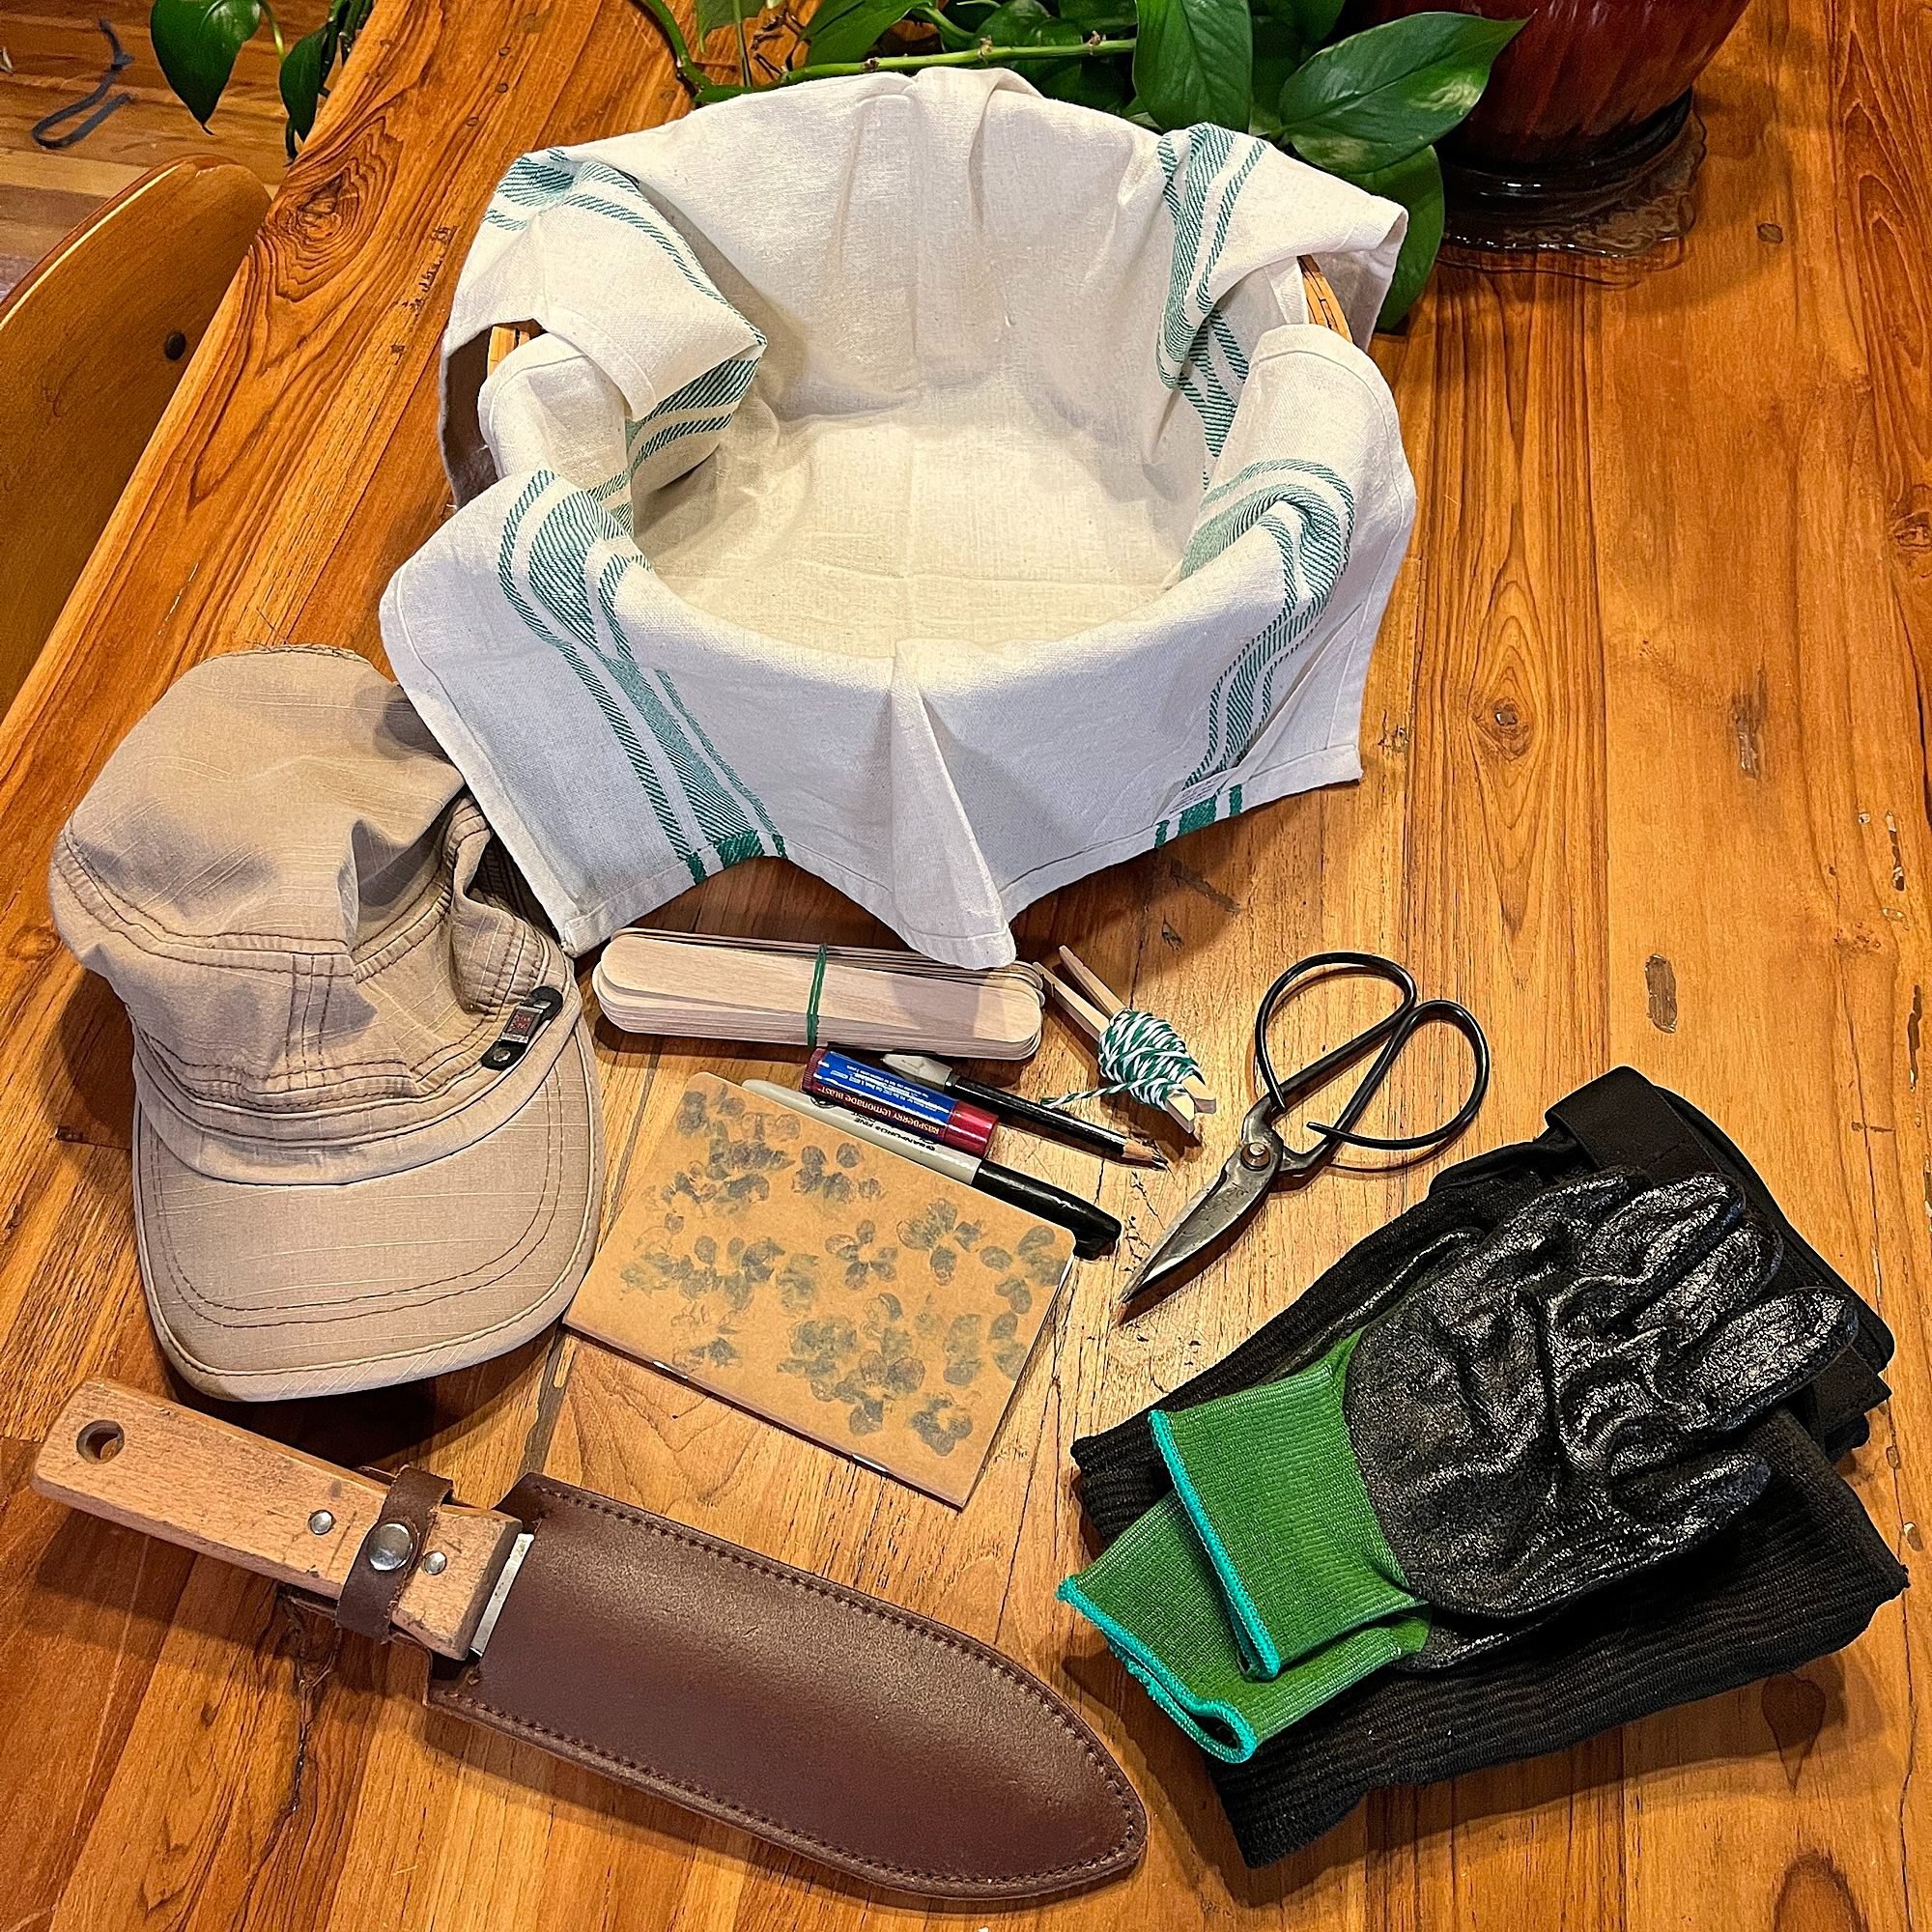 In honor of our new wildcraft / forage / garden sets being released today, I posted a short blog about what's in MY garden basket. Visit greenwitchvintage.com/blog to learn more.

#gardenbasket #wildcraftingbasket #foragingbasket #greenwitchvintage #